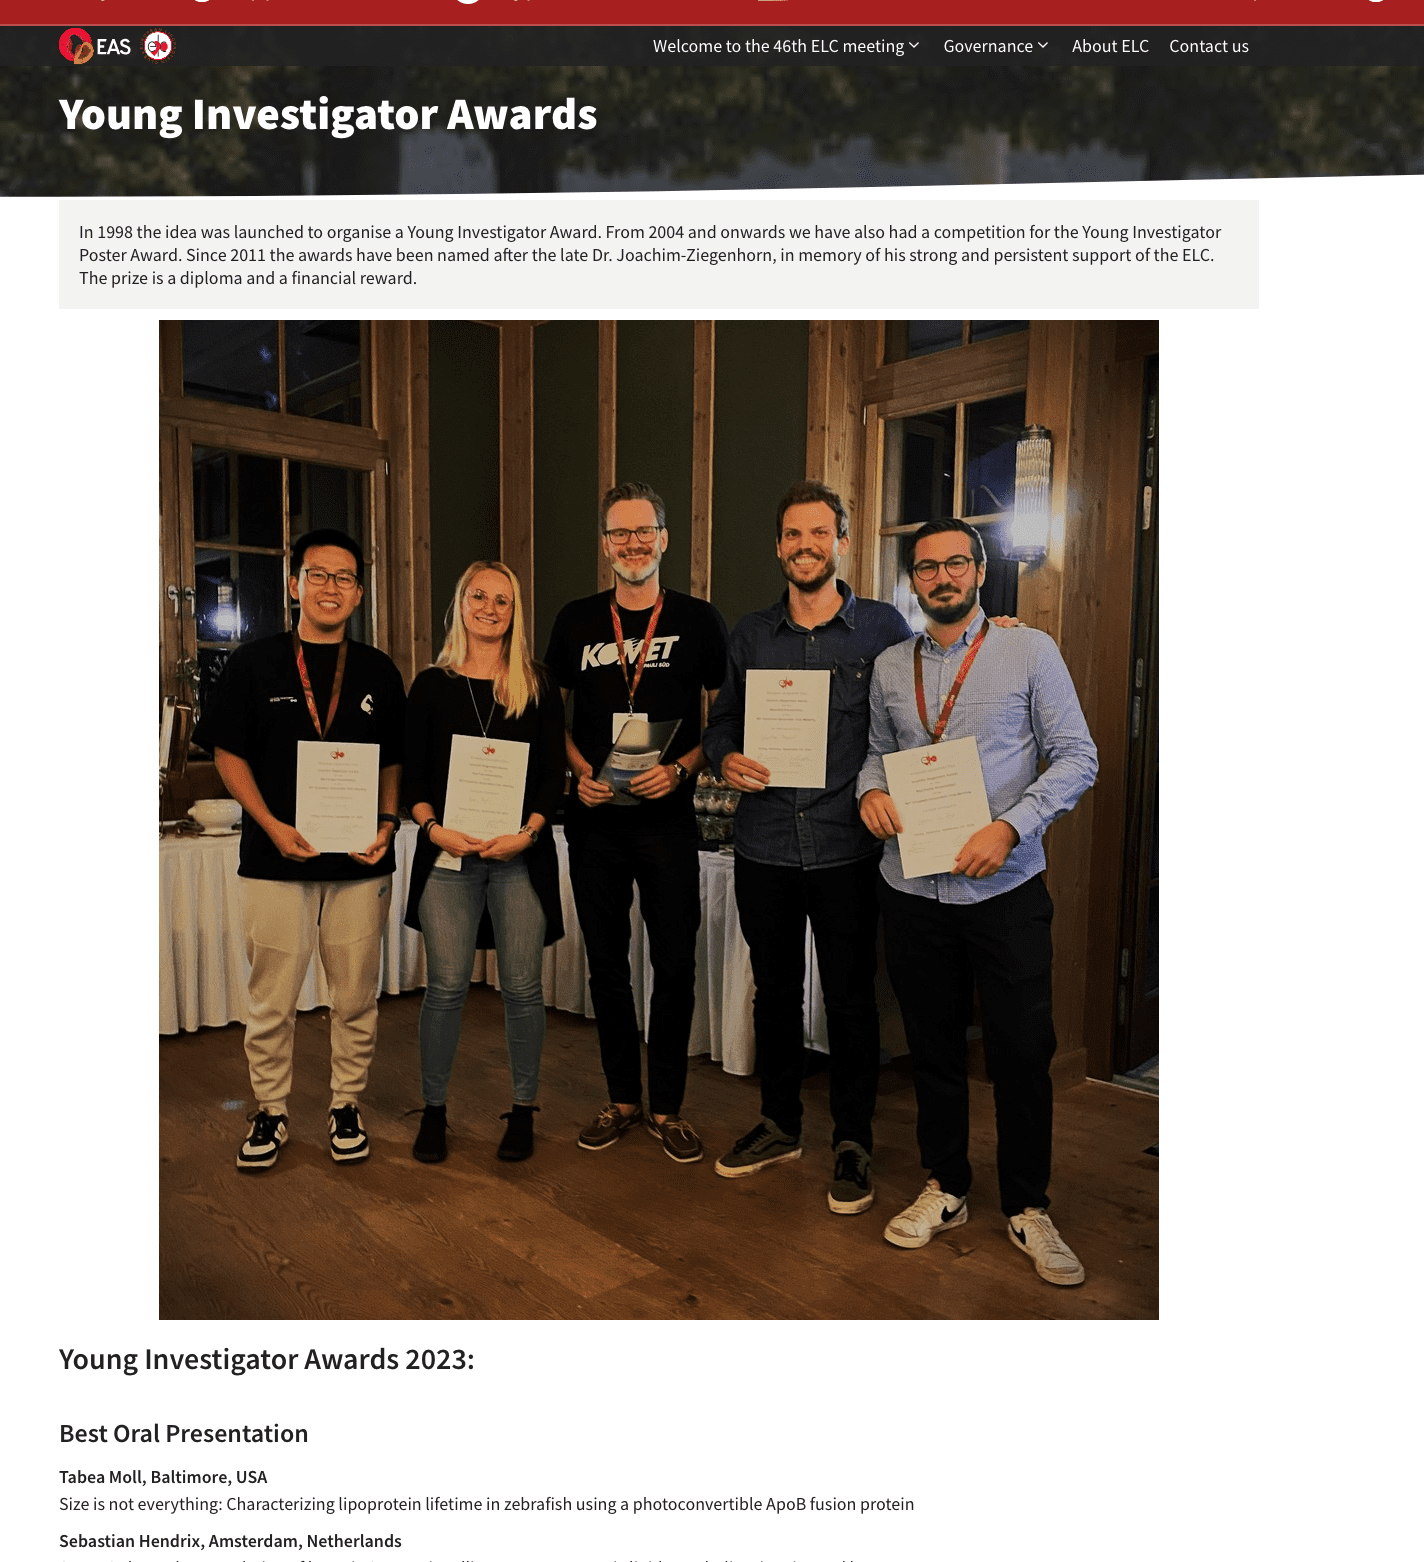 Tabea Moll received the Young Investigator Award for Best Oral Presentation